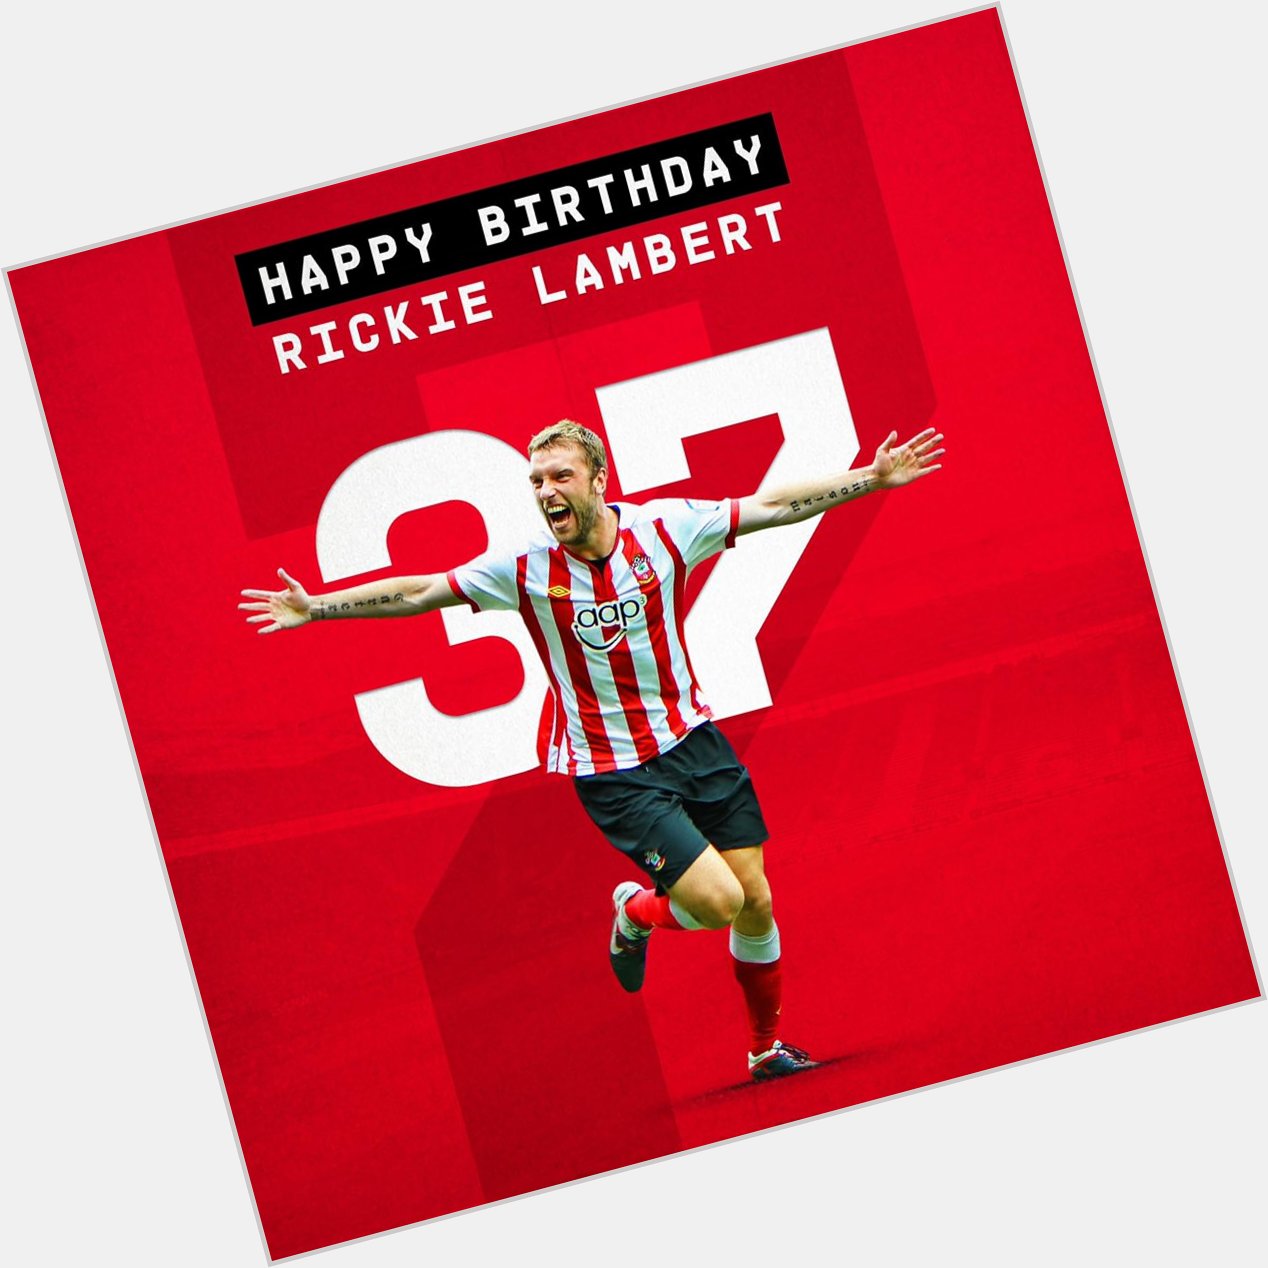 Happy birthday sir Rickie Lambert, hoe we could do with you up front now! 